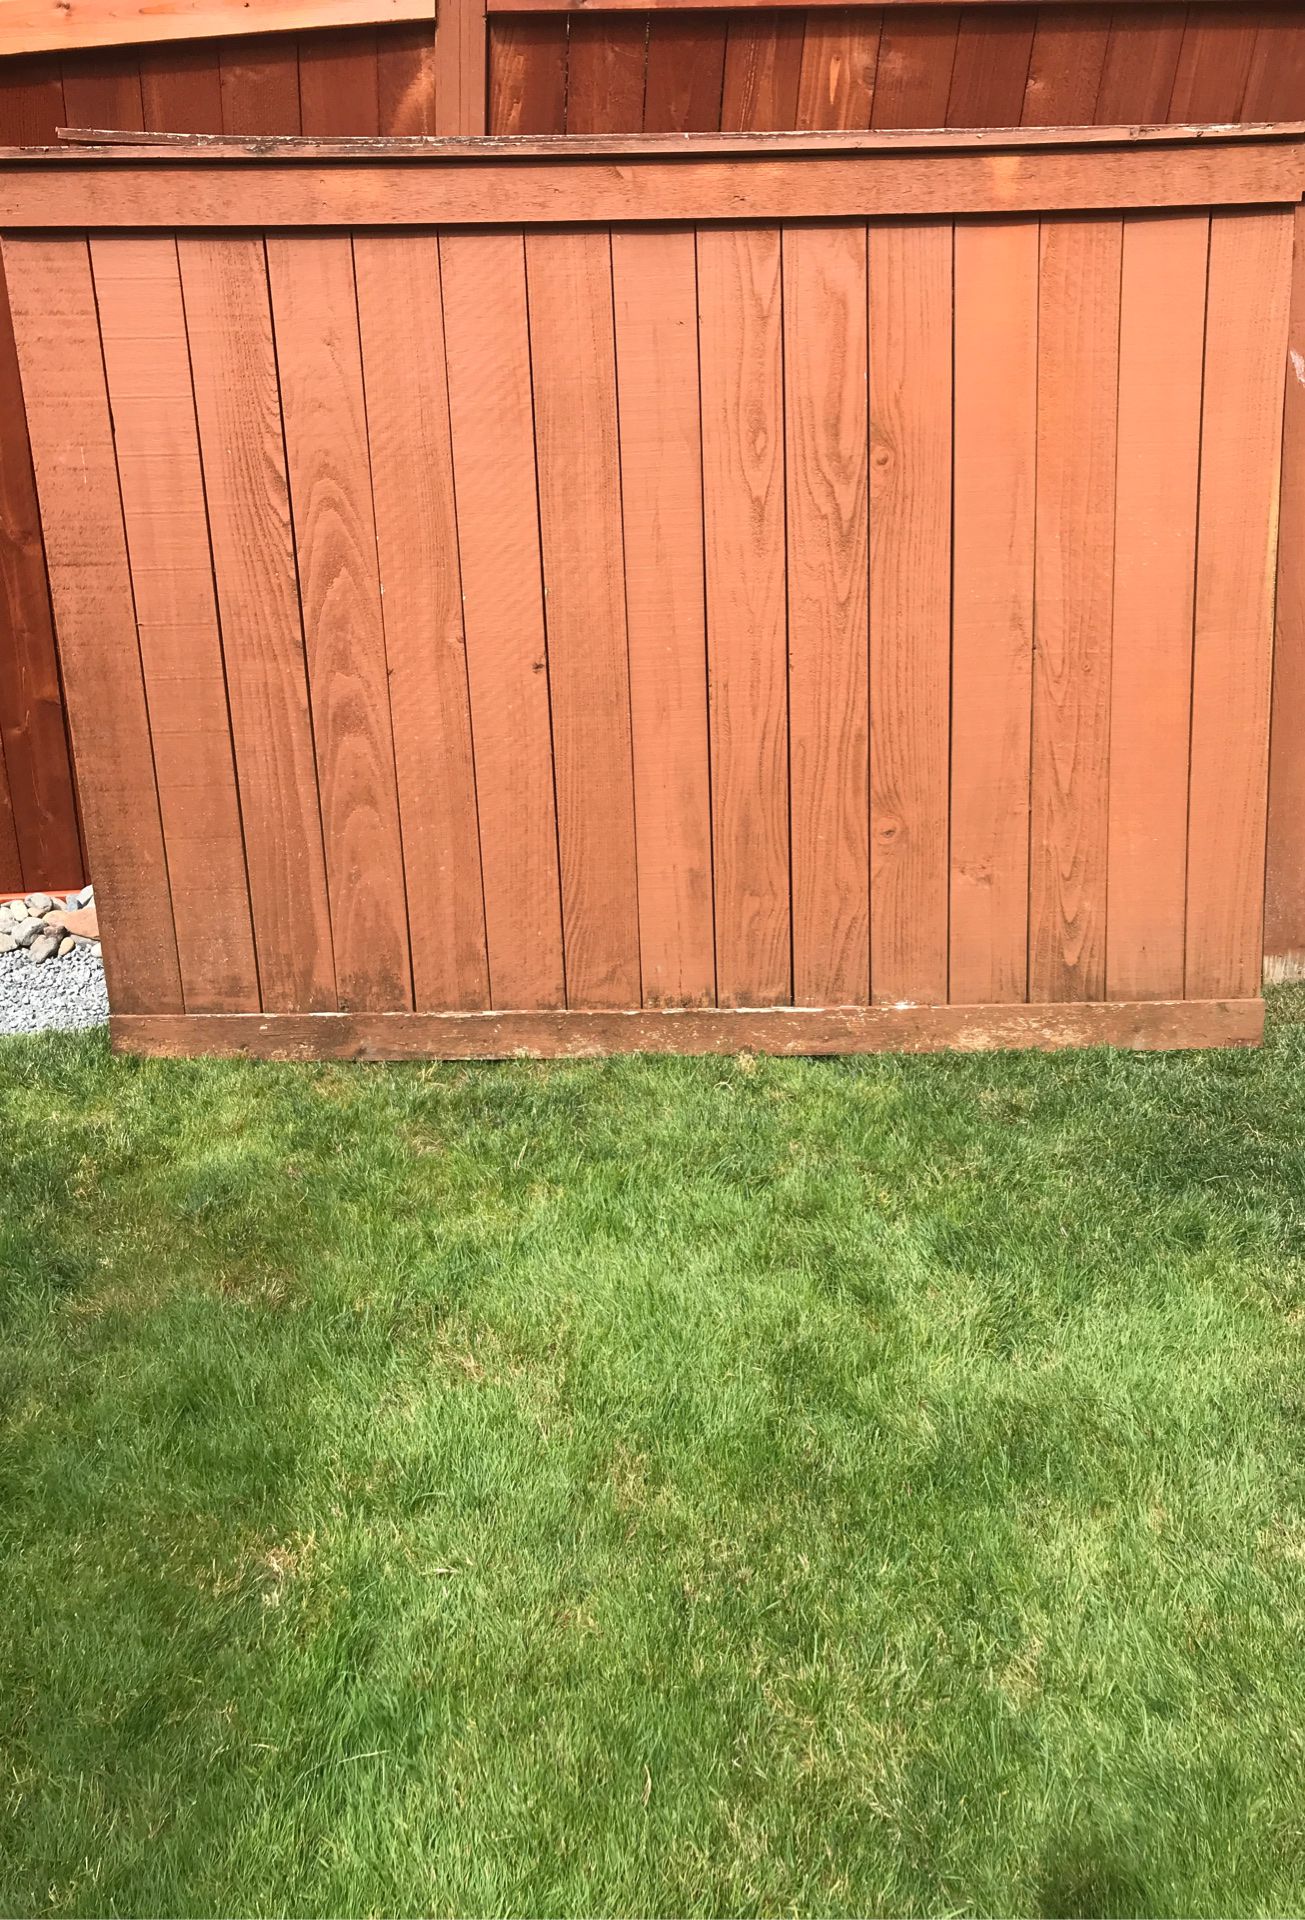 5ft. Recycled Fence Sections